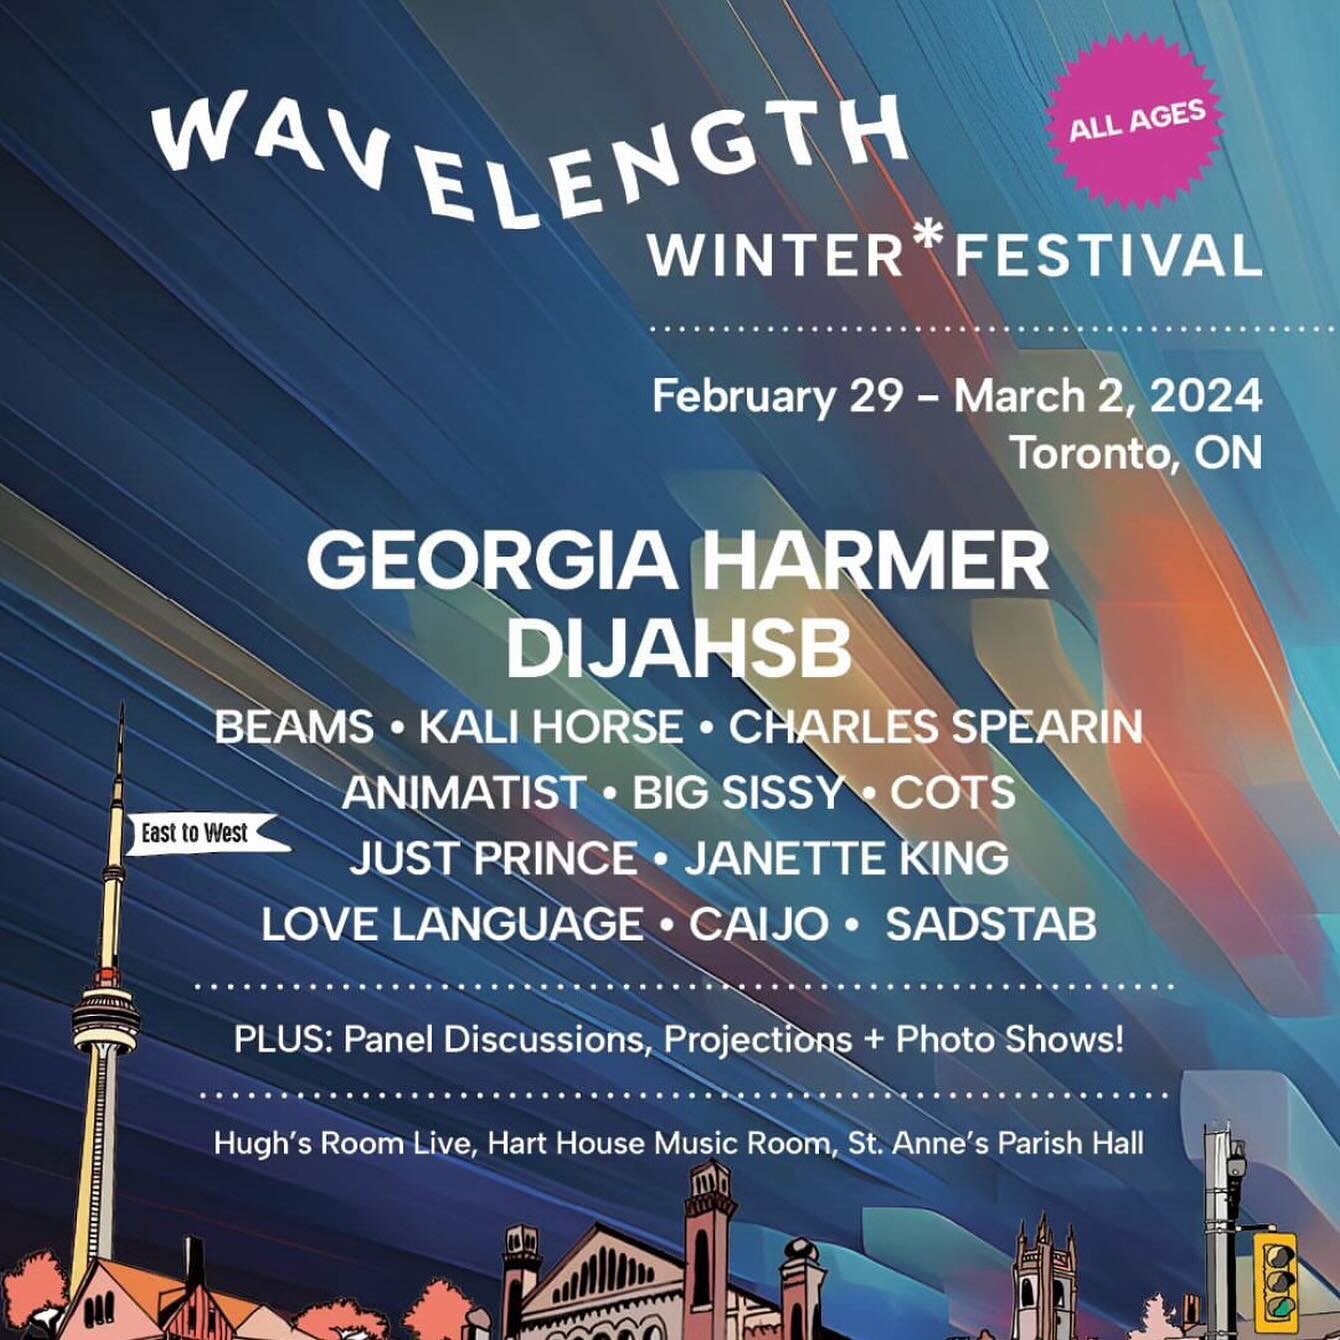 It&rsquo;s that time of the year again! Our friends at @wavelengthmusic annual Winter Festival back for its 24th edition starting *TODAY* Feb 29 until March 2, showcasing three nights of amazing local talent and art. 

The weekend is stacked with pro